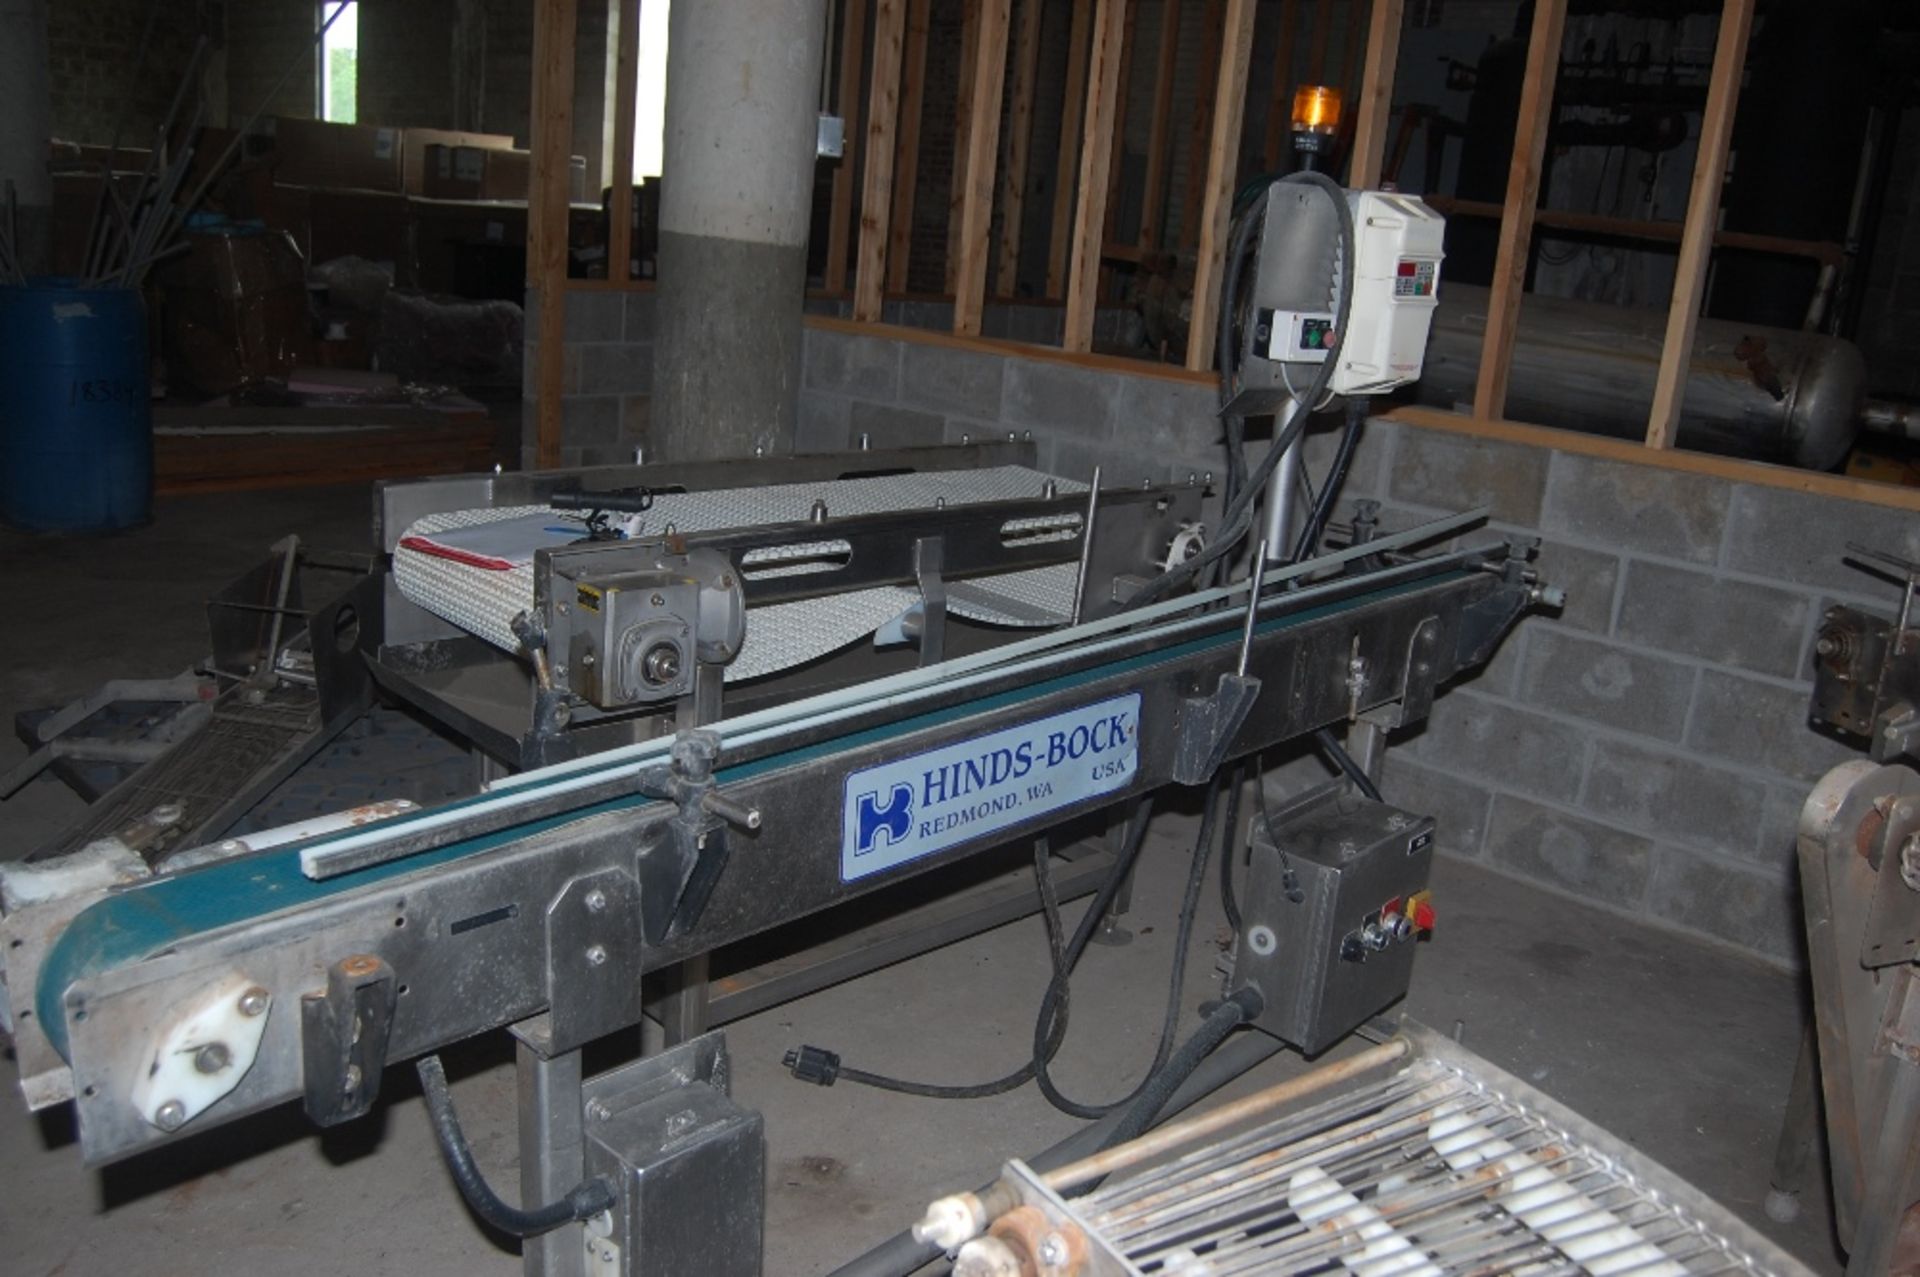 Hindsbock conveyor mod 8C-xx 98x19x36" belt is 41/2 x 98 inches ***LOADING FEE OF: $ 50 will be - Image 3 of 7